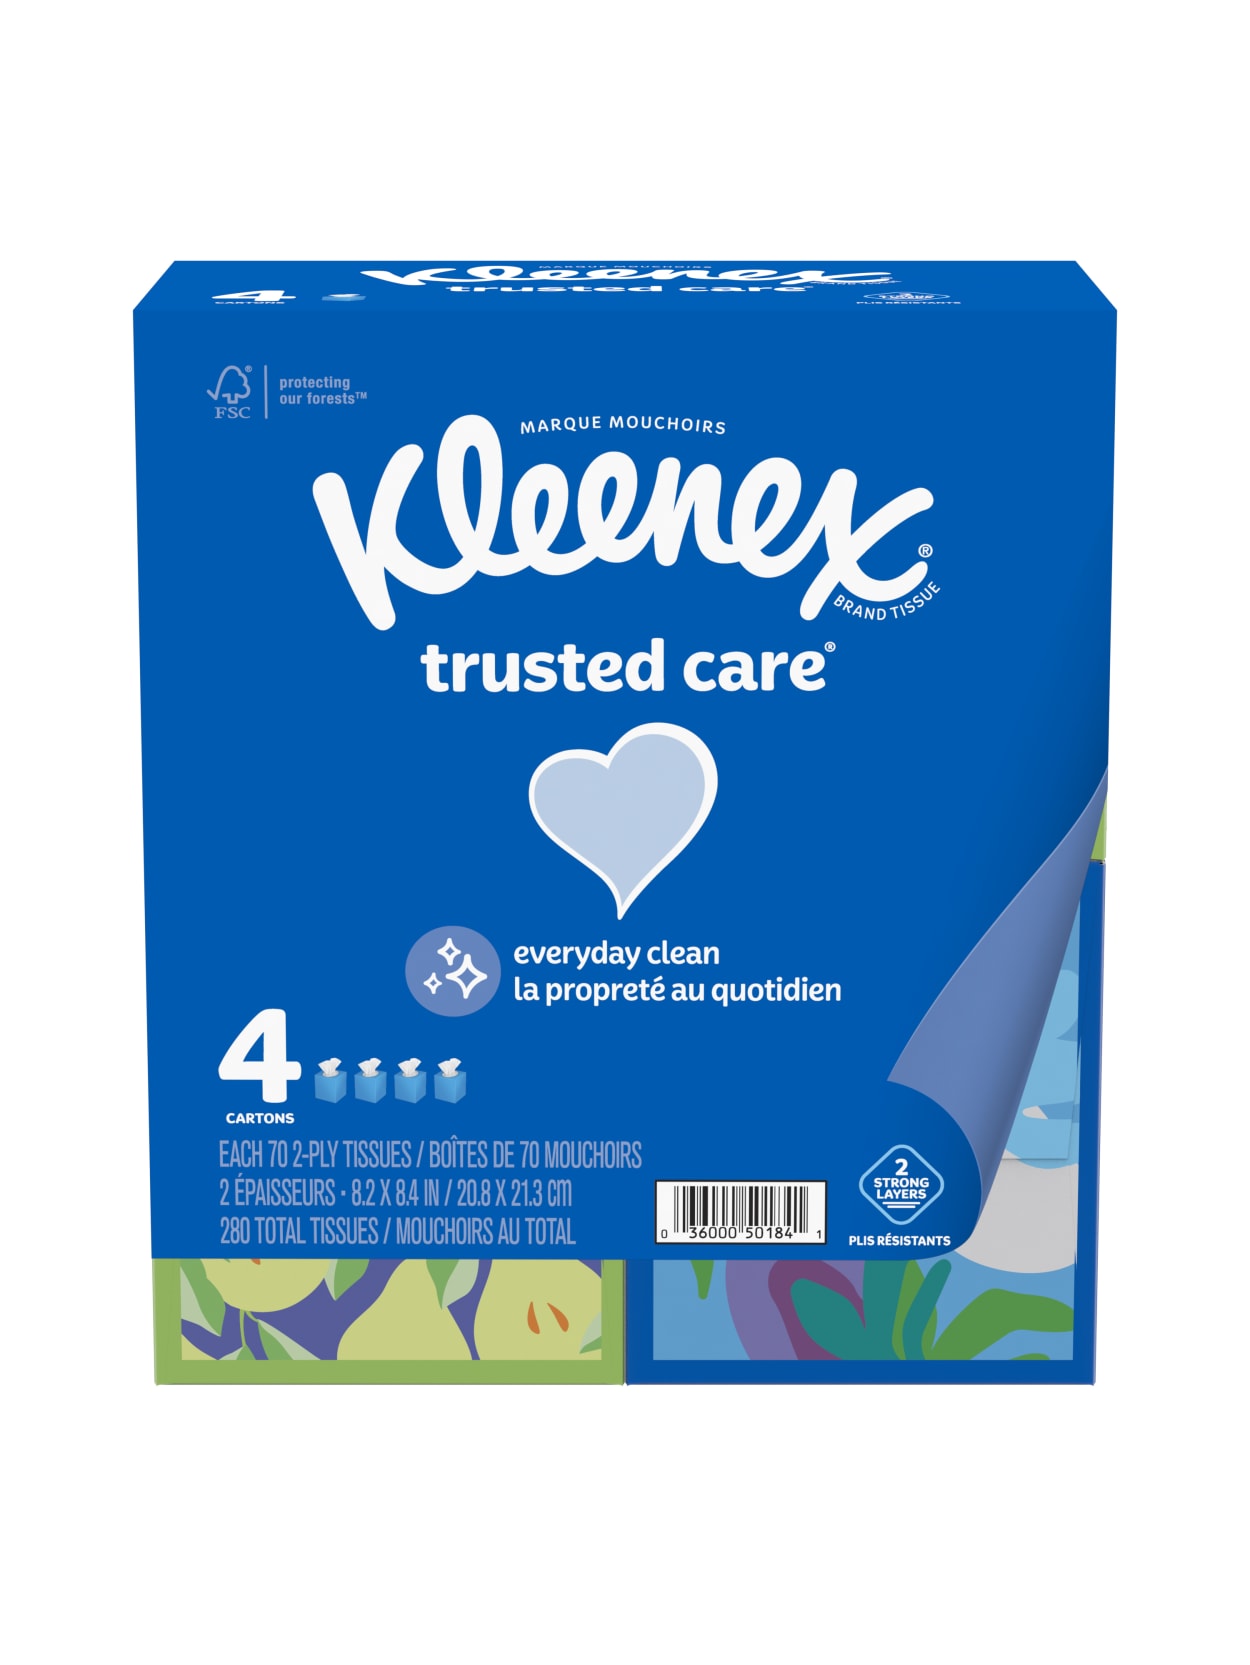 Download Kleenex Trusted Care Tissues 24 Pk Office Depot